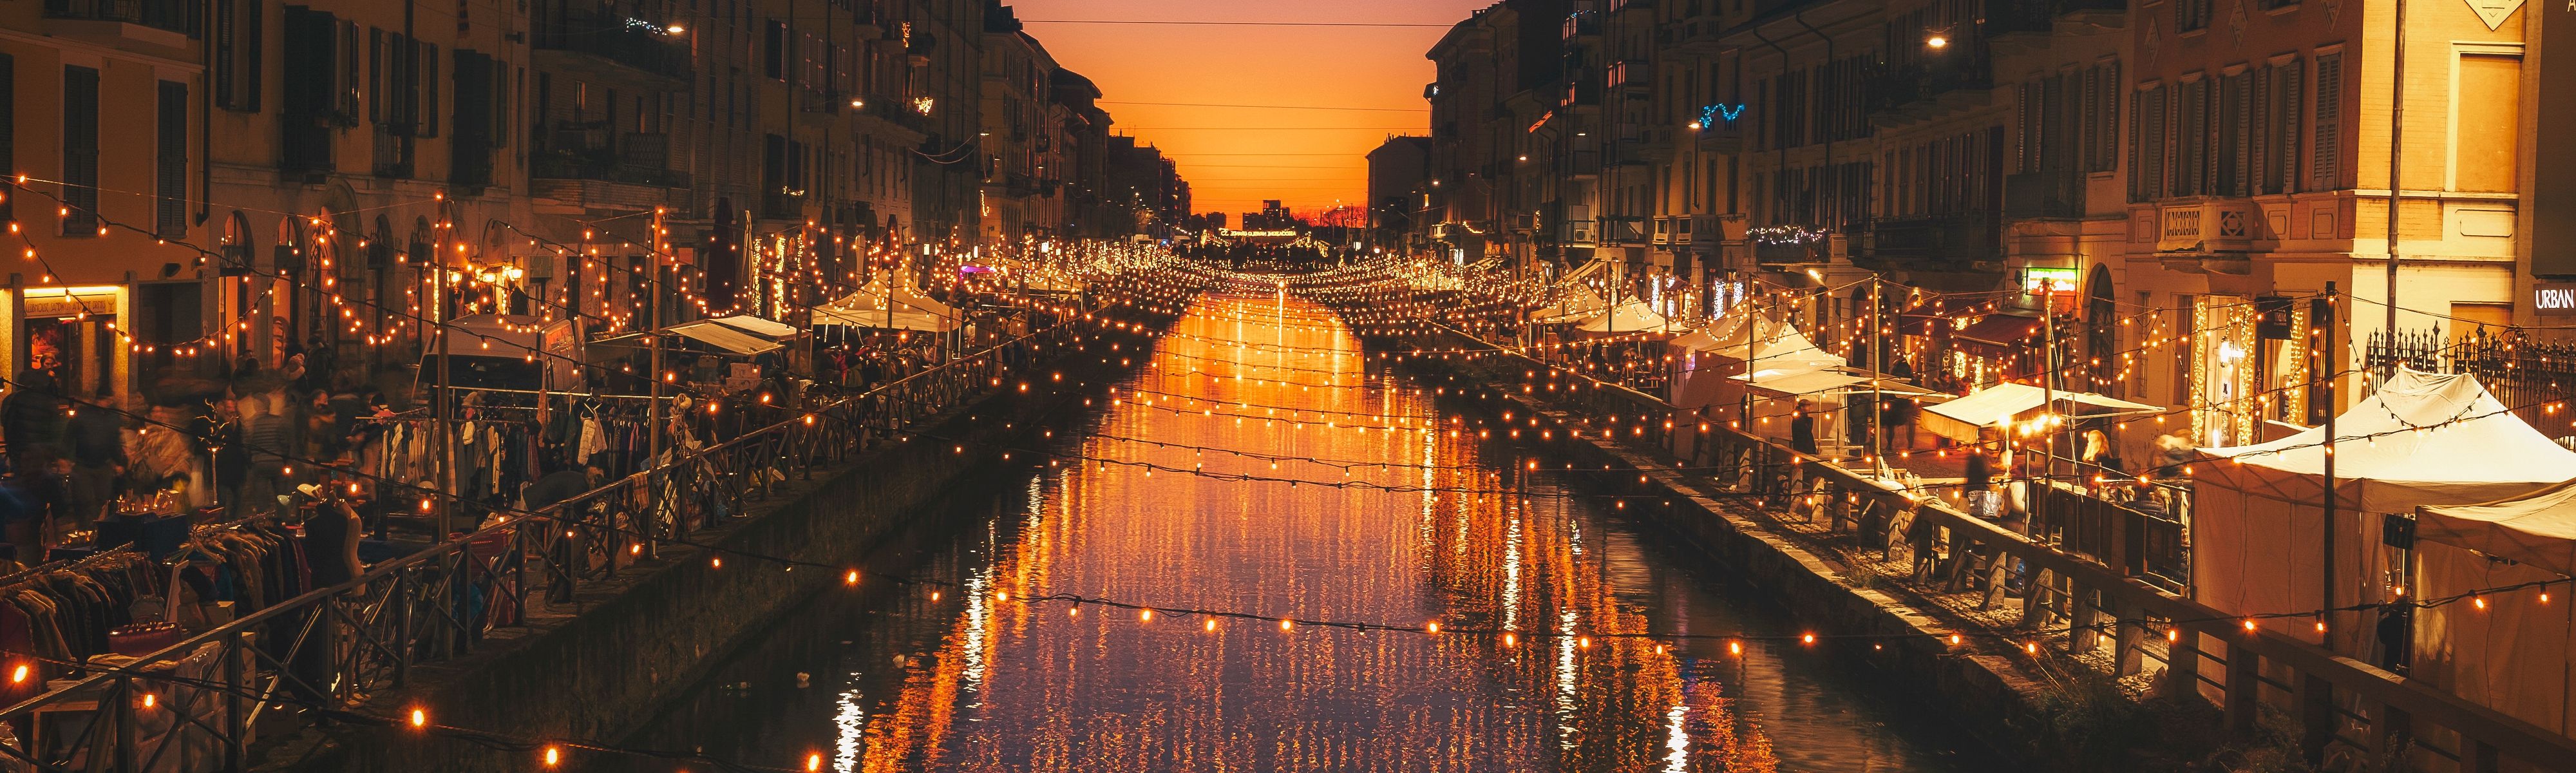 strung up lights crossing over canal in venice italy at night